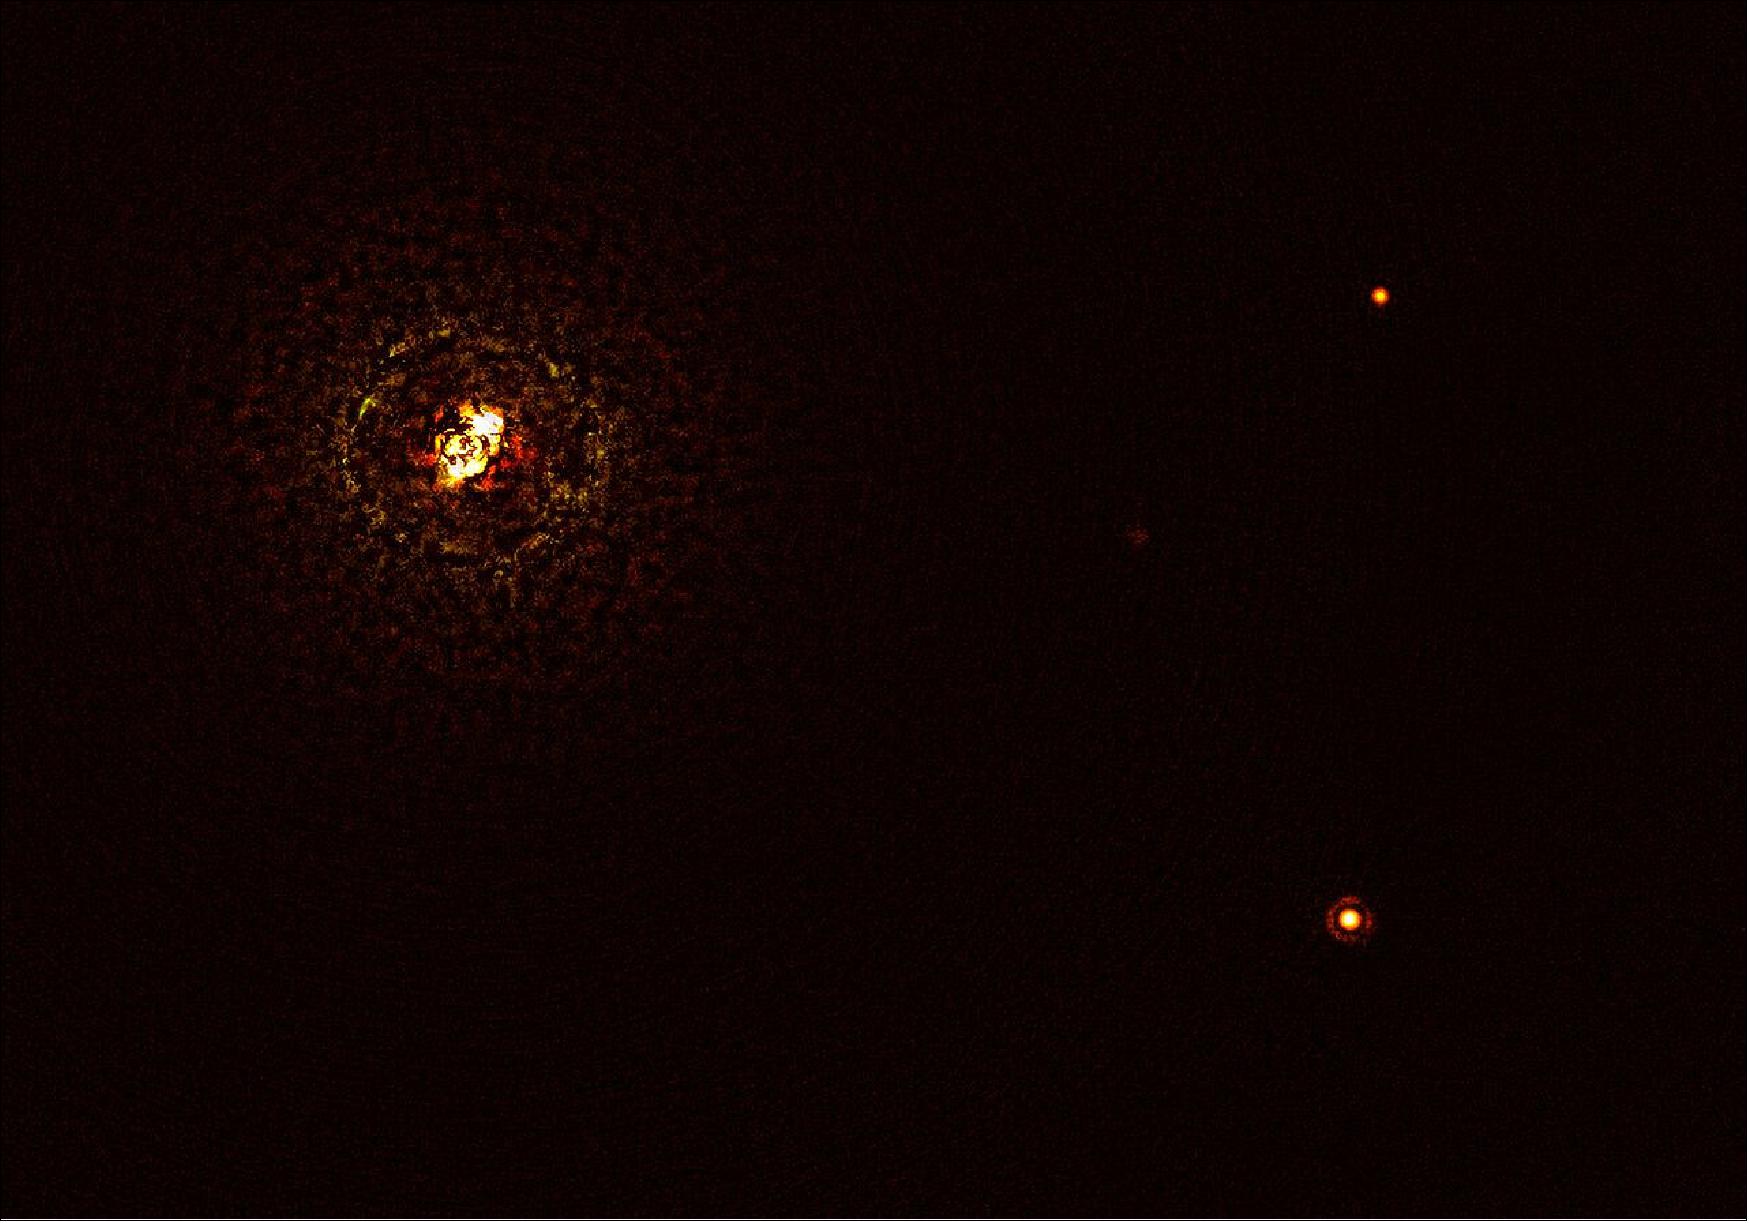 Figure 12: This image shows the most massive planet-hosting star pair to date, b Centauri, and its giant planet b Centauri b. This is the first time astronomers have directly observed a planet orbiting a star pair this massive and hot. - The star pair, which has a total mass of at least six times that of the Sun, is the bright object in the top left corner of the image, the bright and dark rings around it being optical artefacts. The planet, visible as a bright dot in the lower right of the frame, is ten times as massive as Jupiter and orbits the pair at 100 times the distance Jupiter orbits the Sun. The other bright dot in the image (top right) is a background star. By taking different images at different times, astronomers were able to distinguish the planet from the background stars. - The image was captured by the SPHERE instrument on ESO’s Very Large Telescope and using a coronagraph, which blocked the light from the massive star system and allowed astronomers to detect the faint planet (image credit: ESO/Janson et al.)